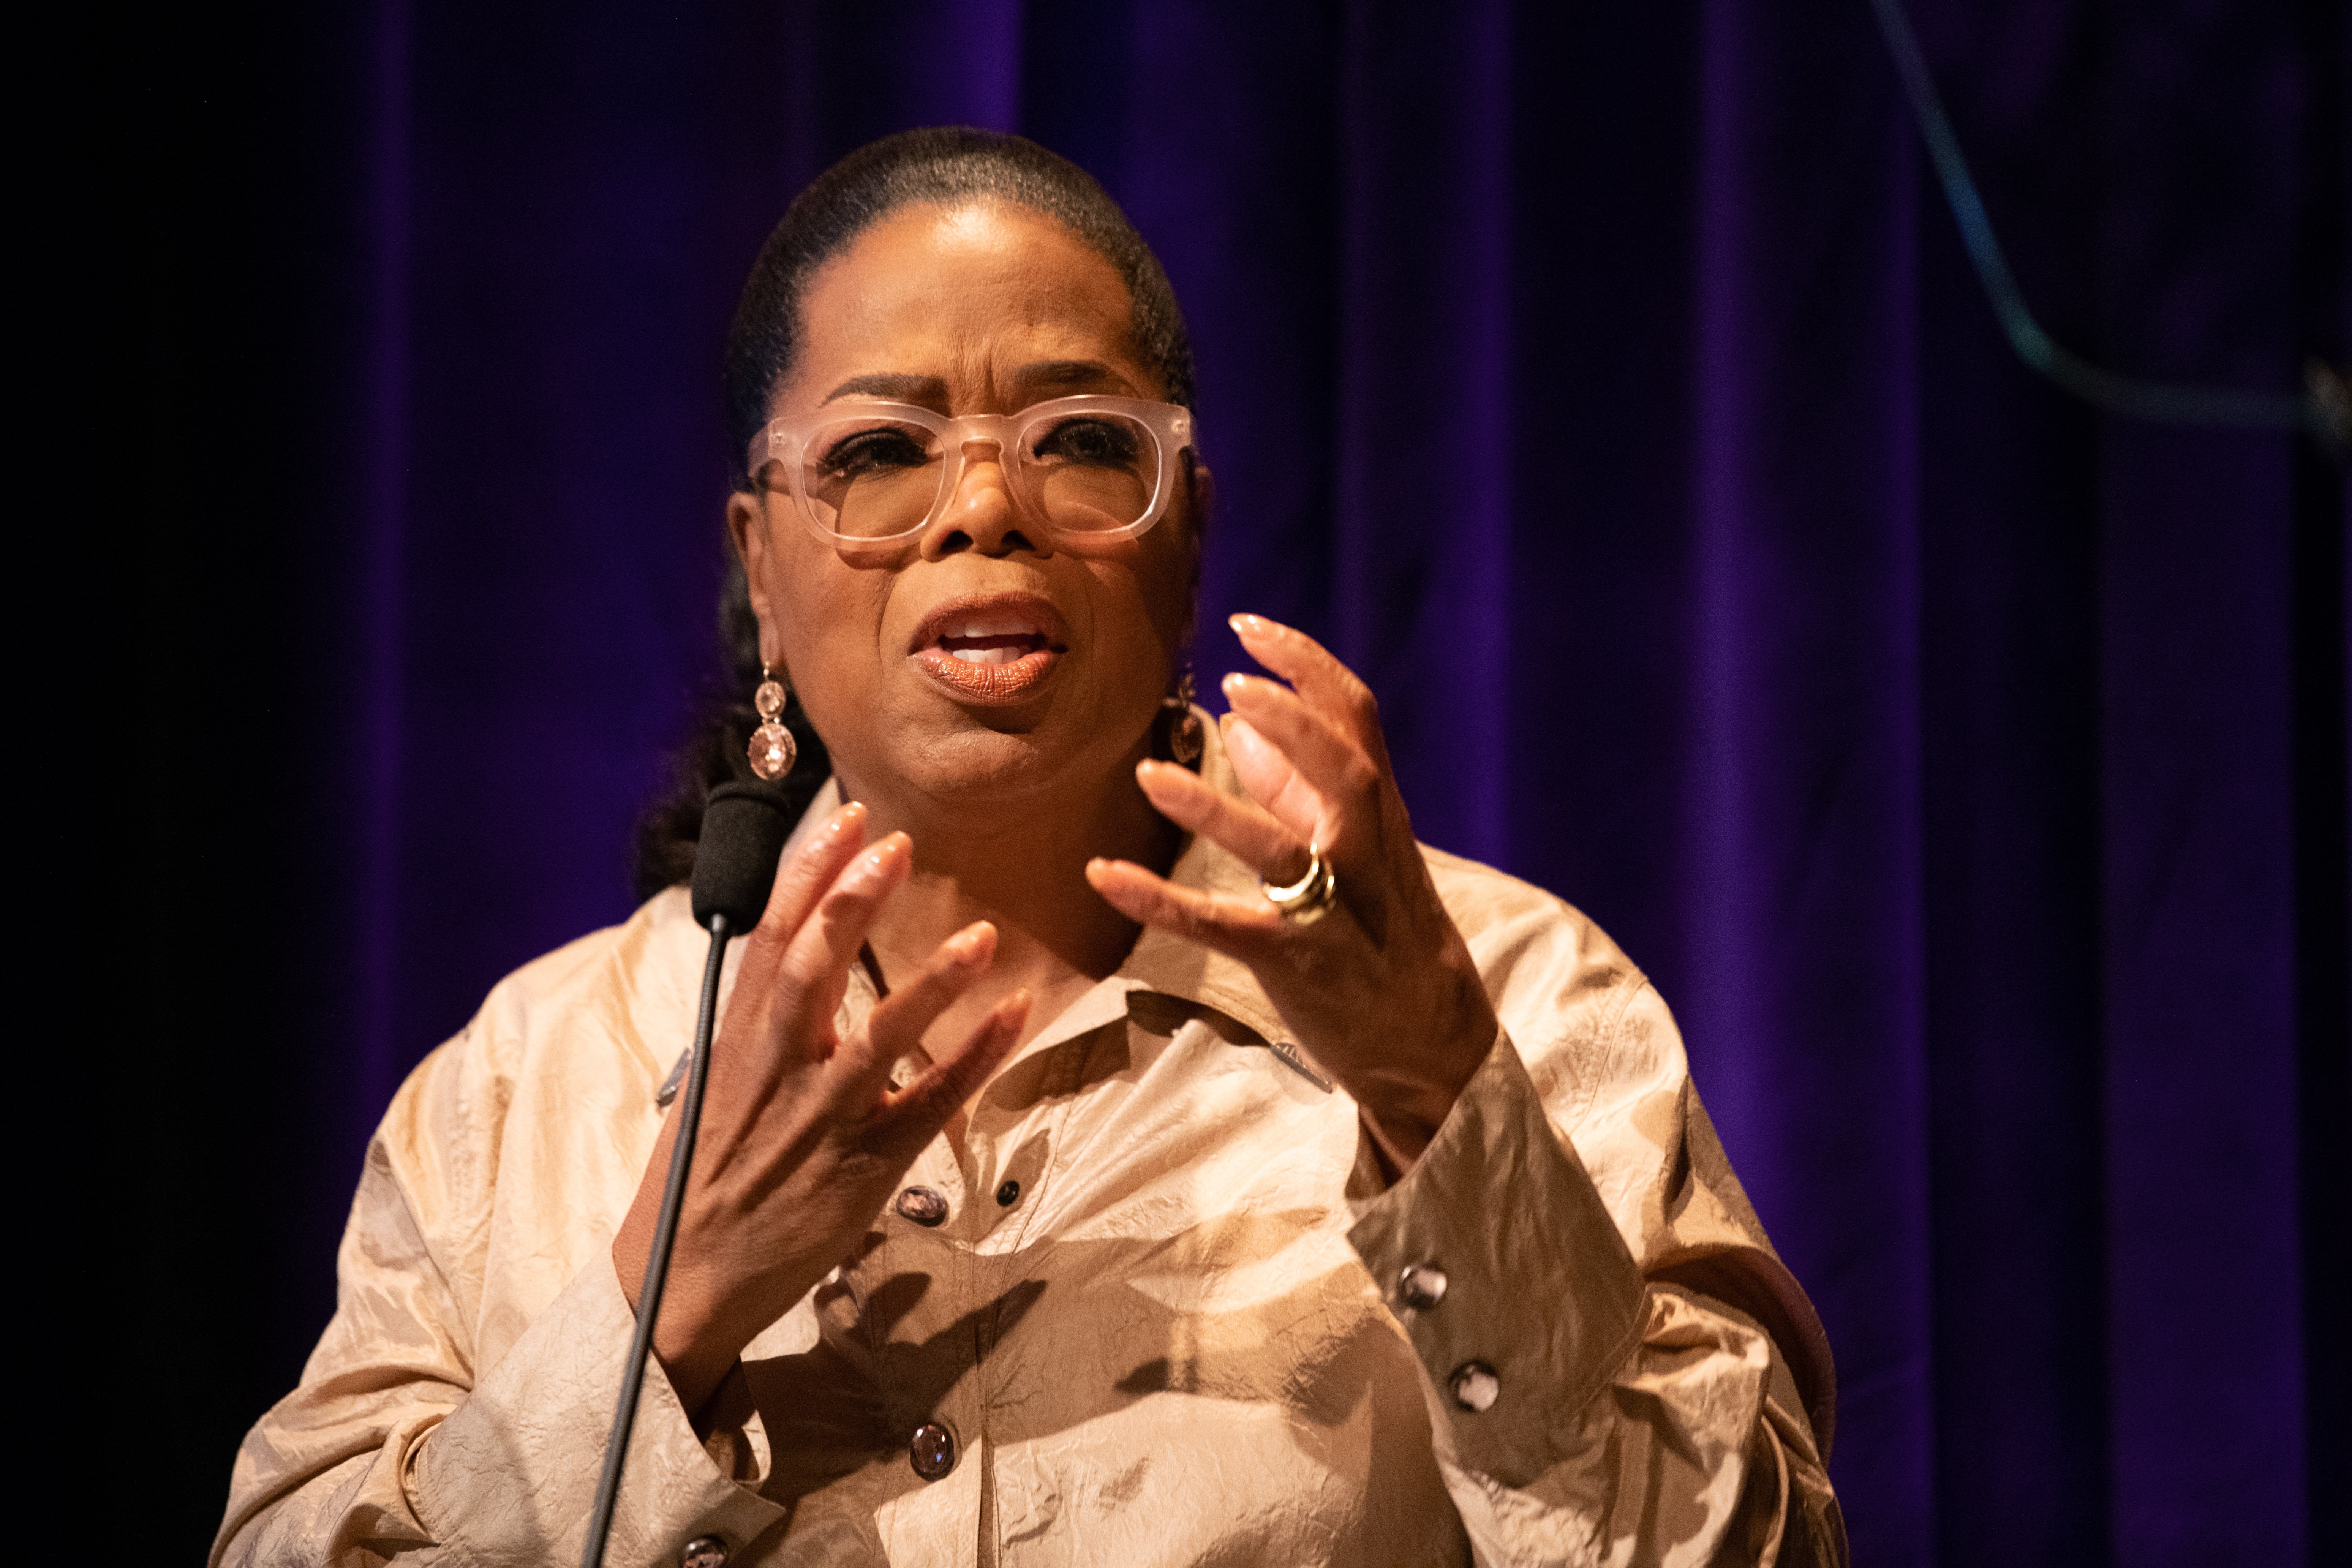 Oprah Winfrey speaks onstage at the Women's E3 Summit on June 7, 2018. | Photo: GettyImages